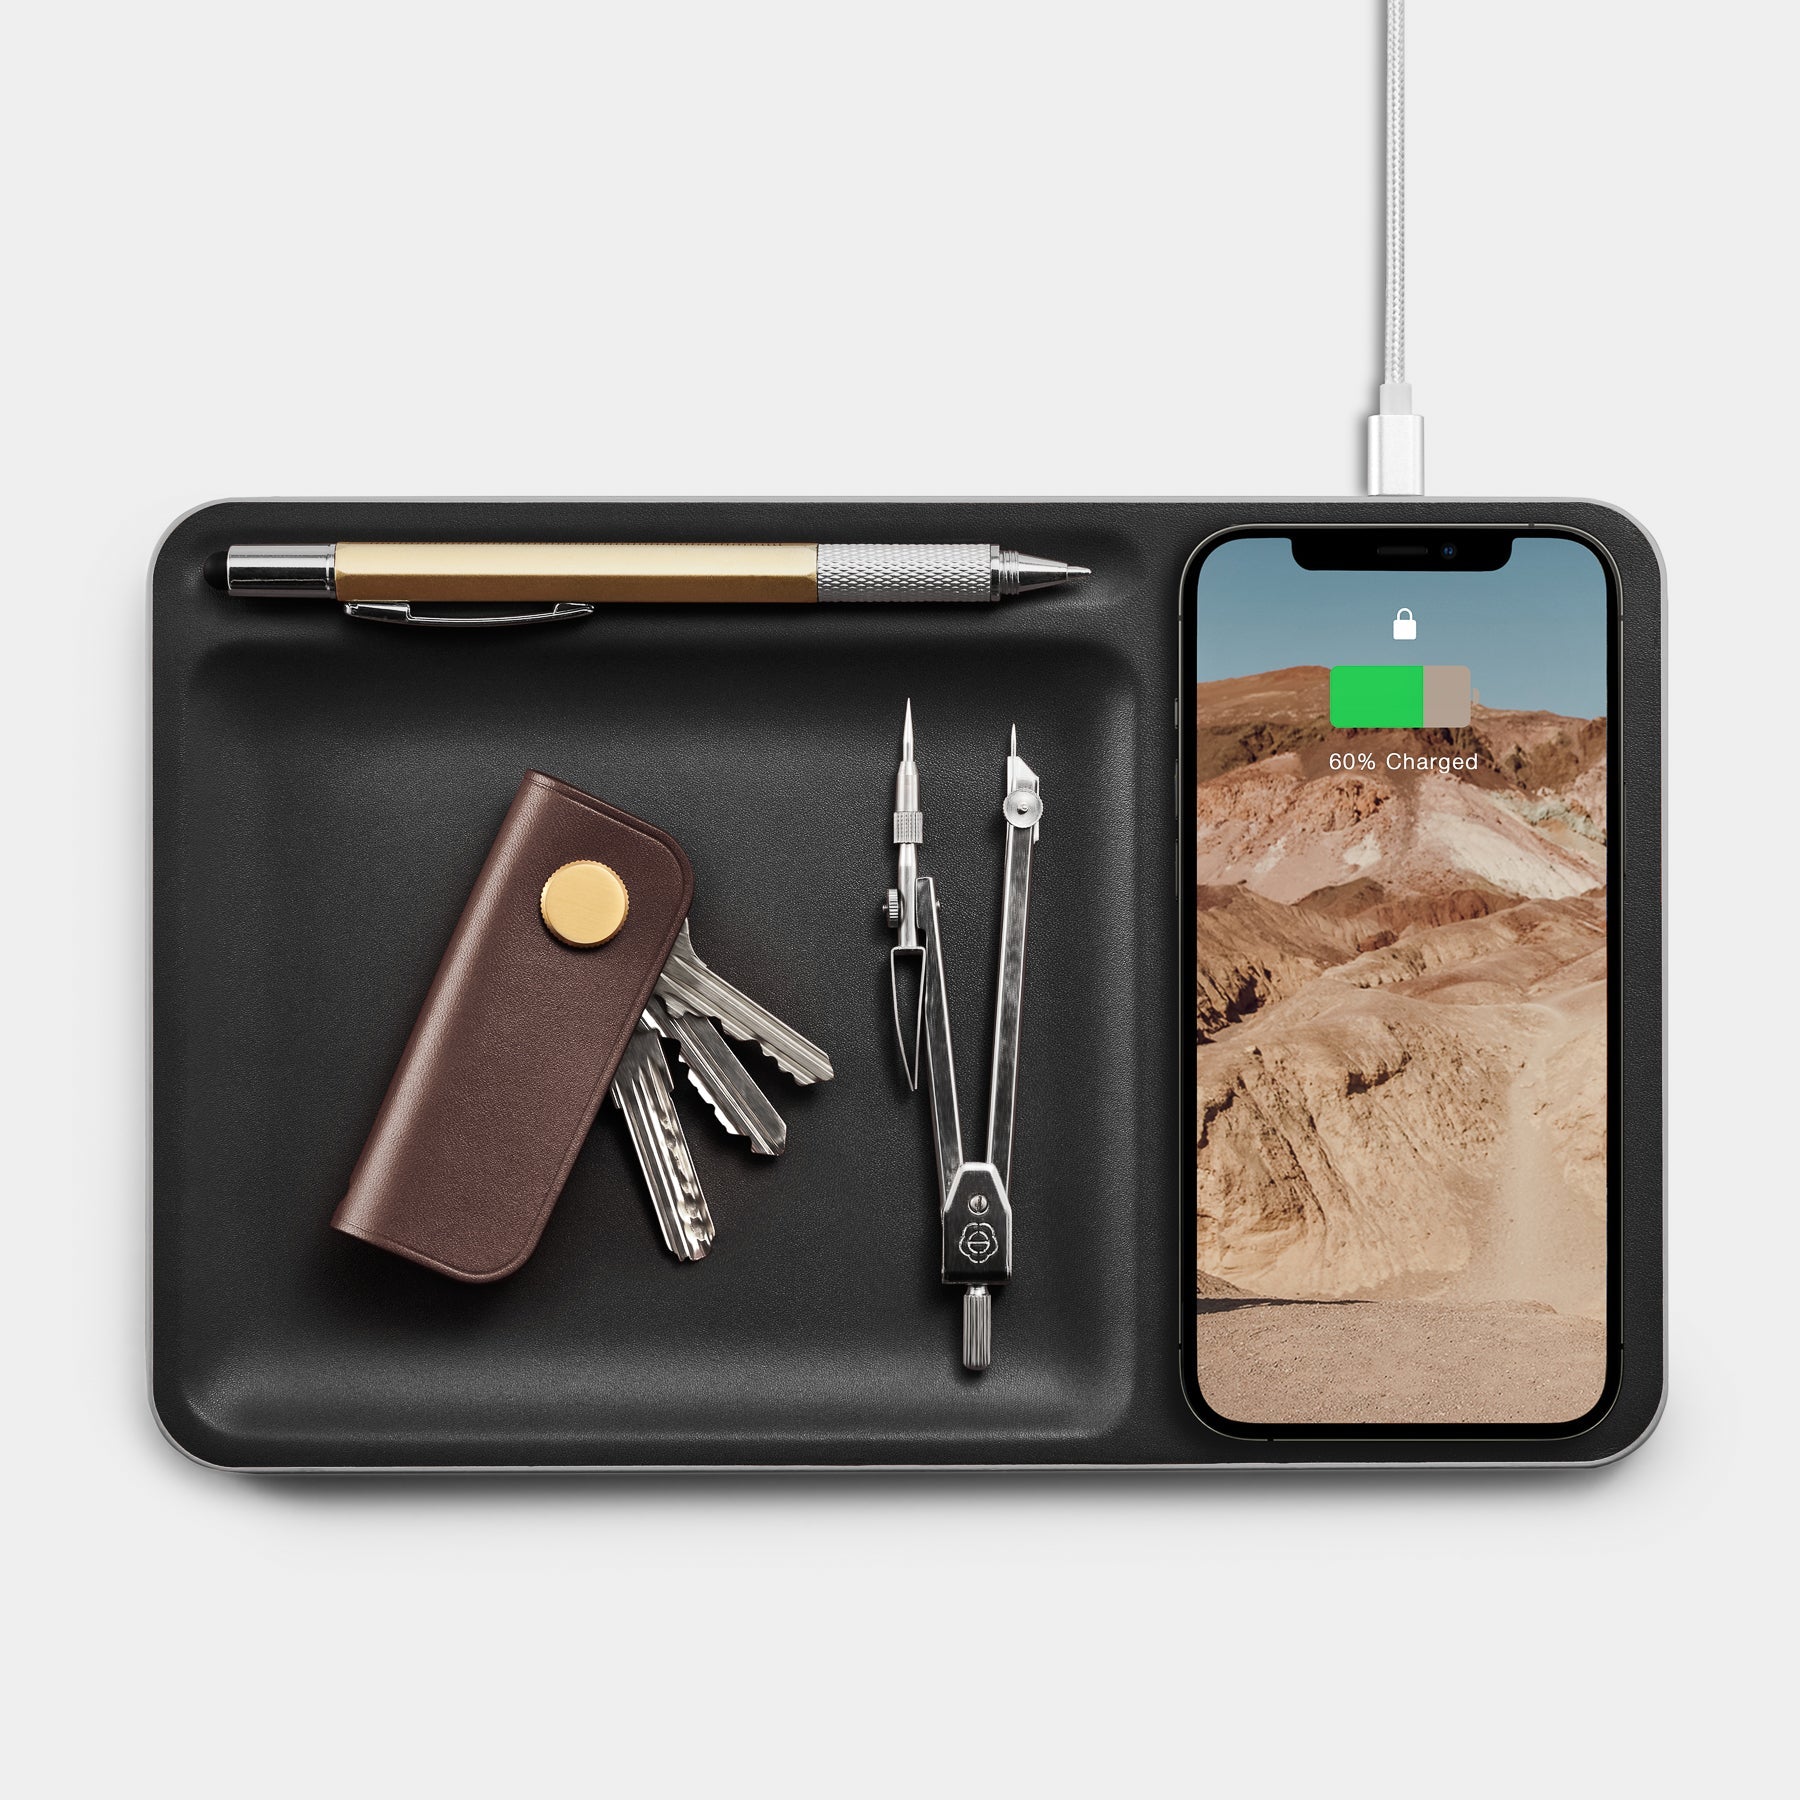 The Charging Tray - Return Black Wireless leather charging tray